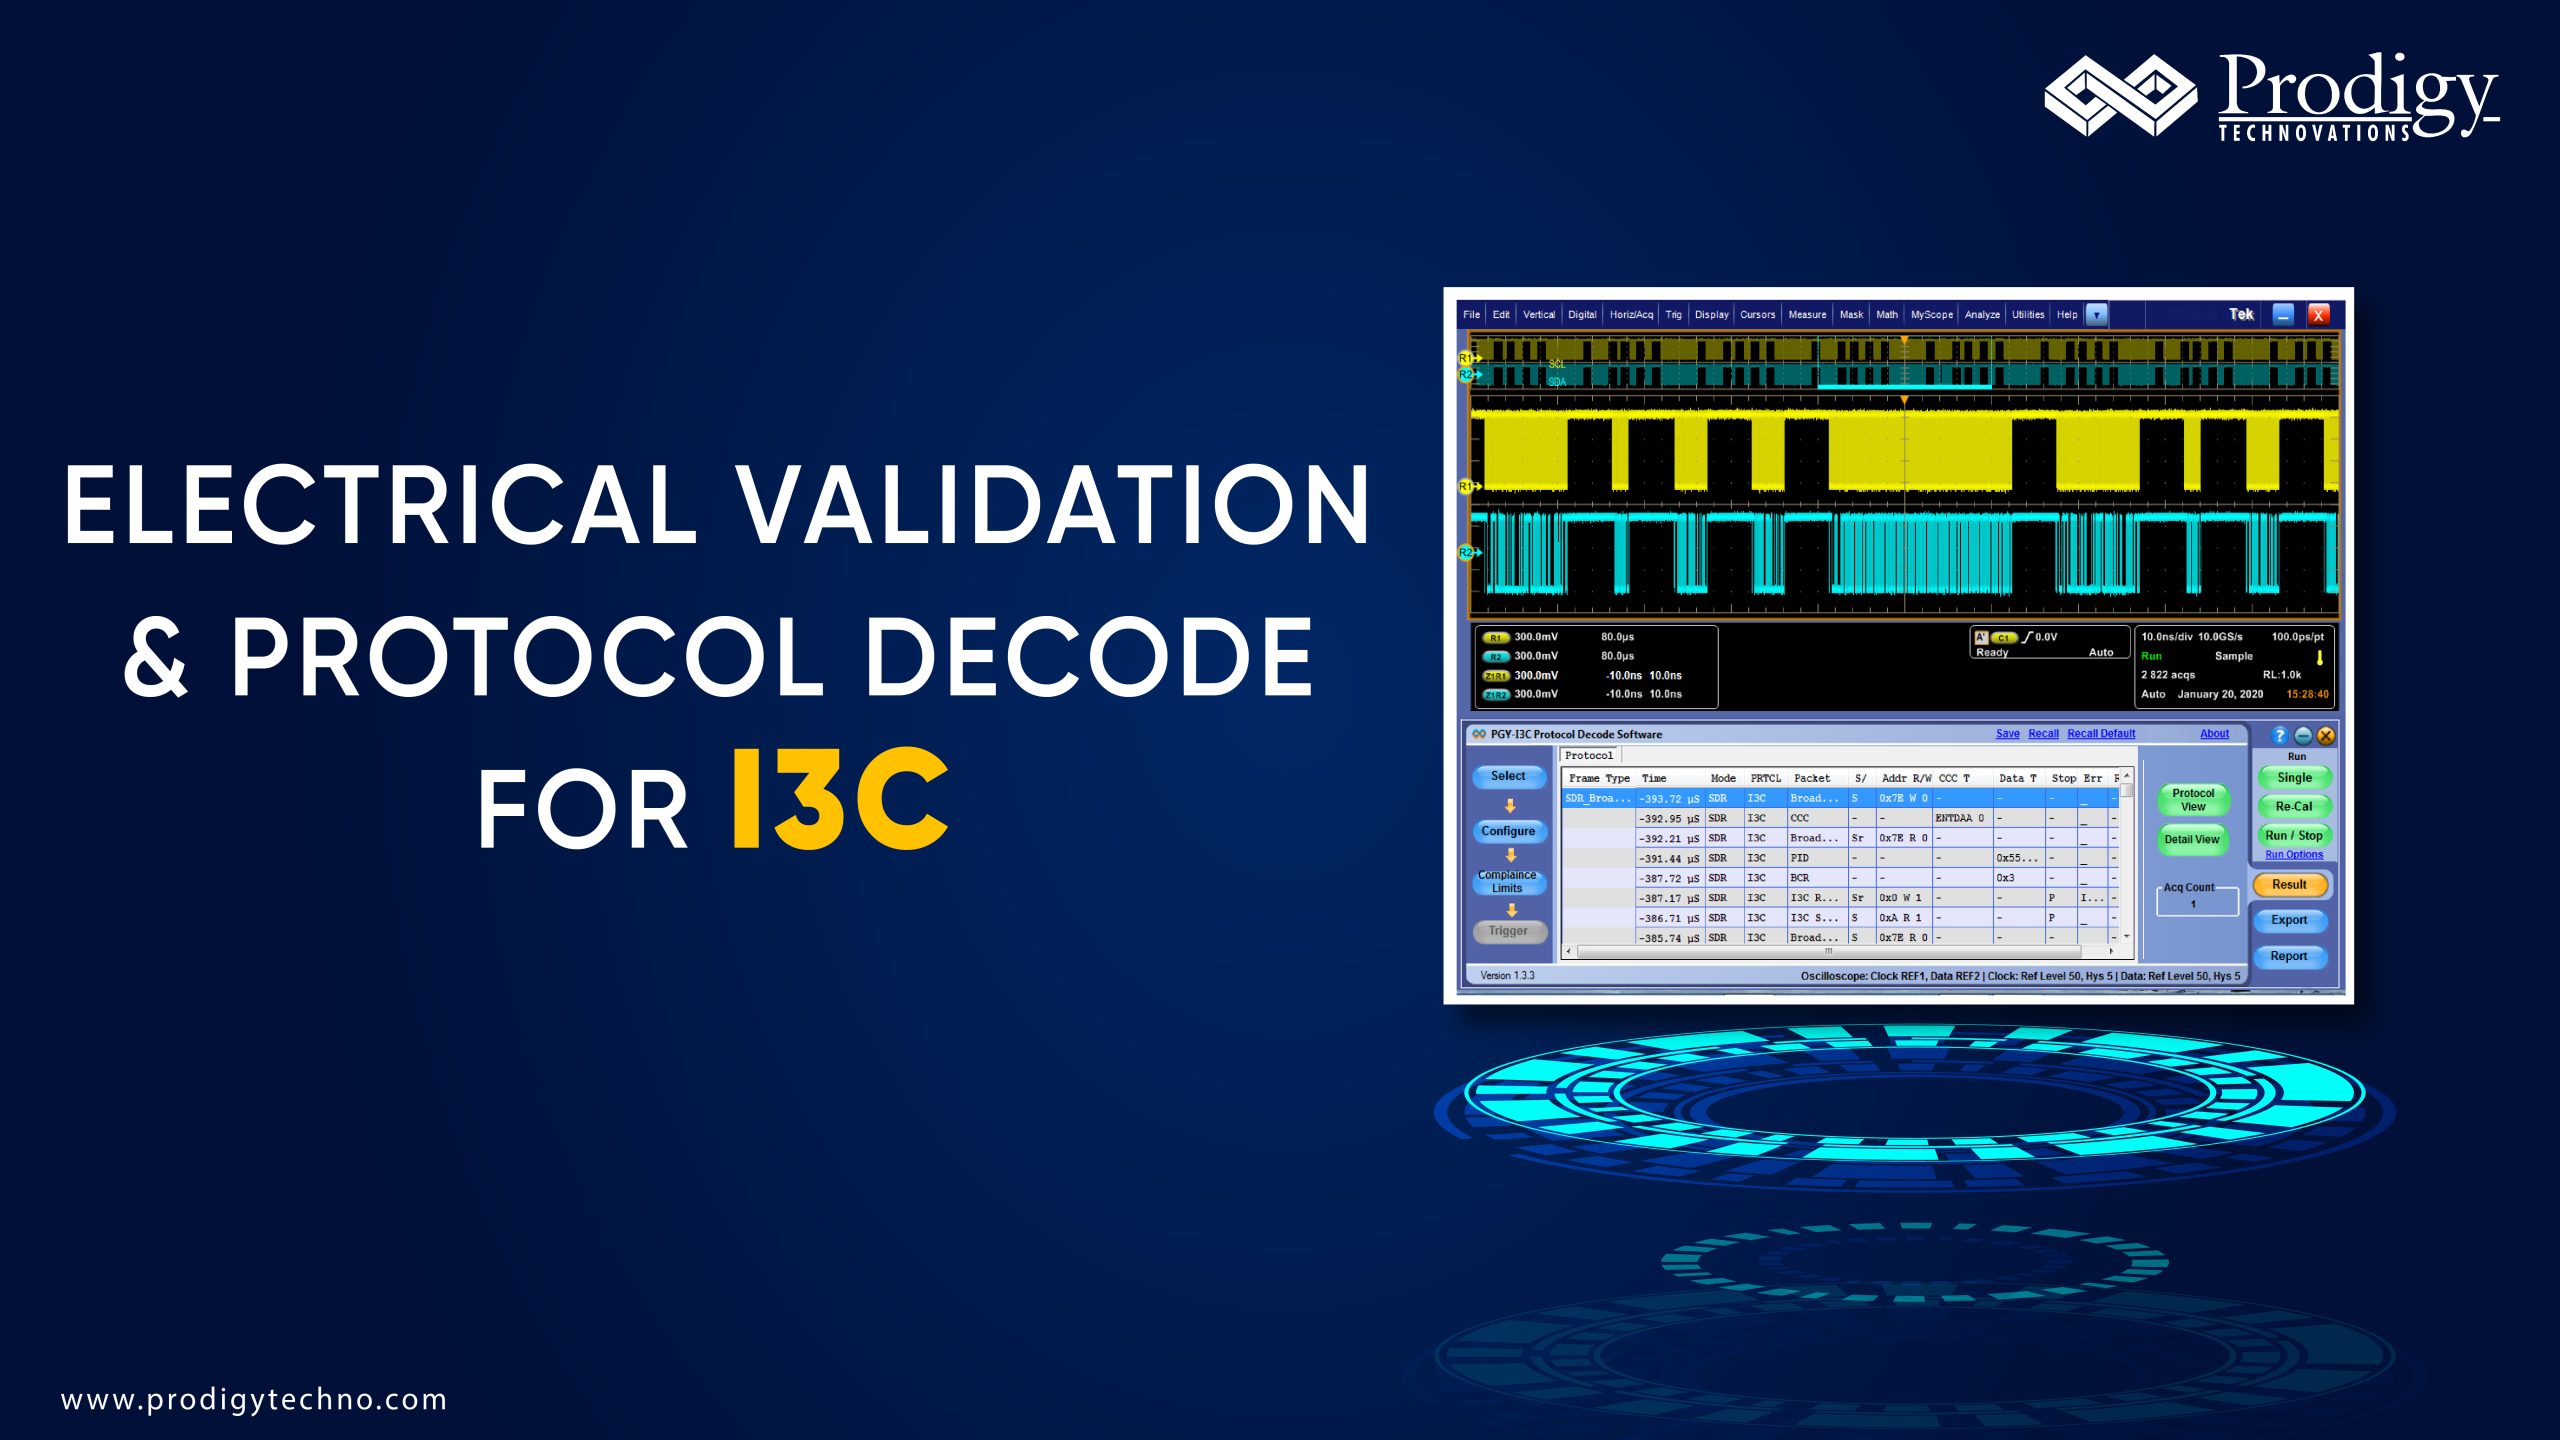 Electrical Validation & Protocol Decode for I3C